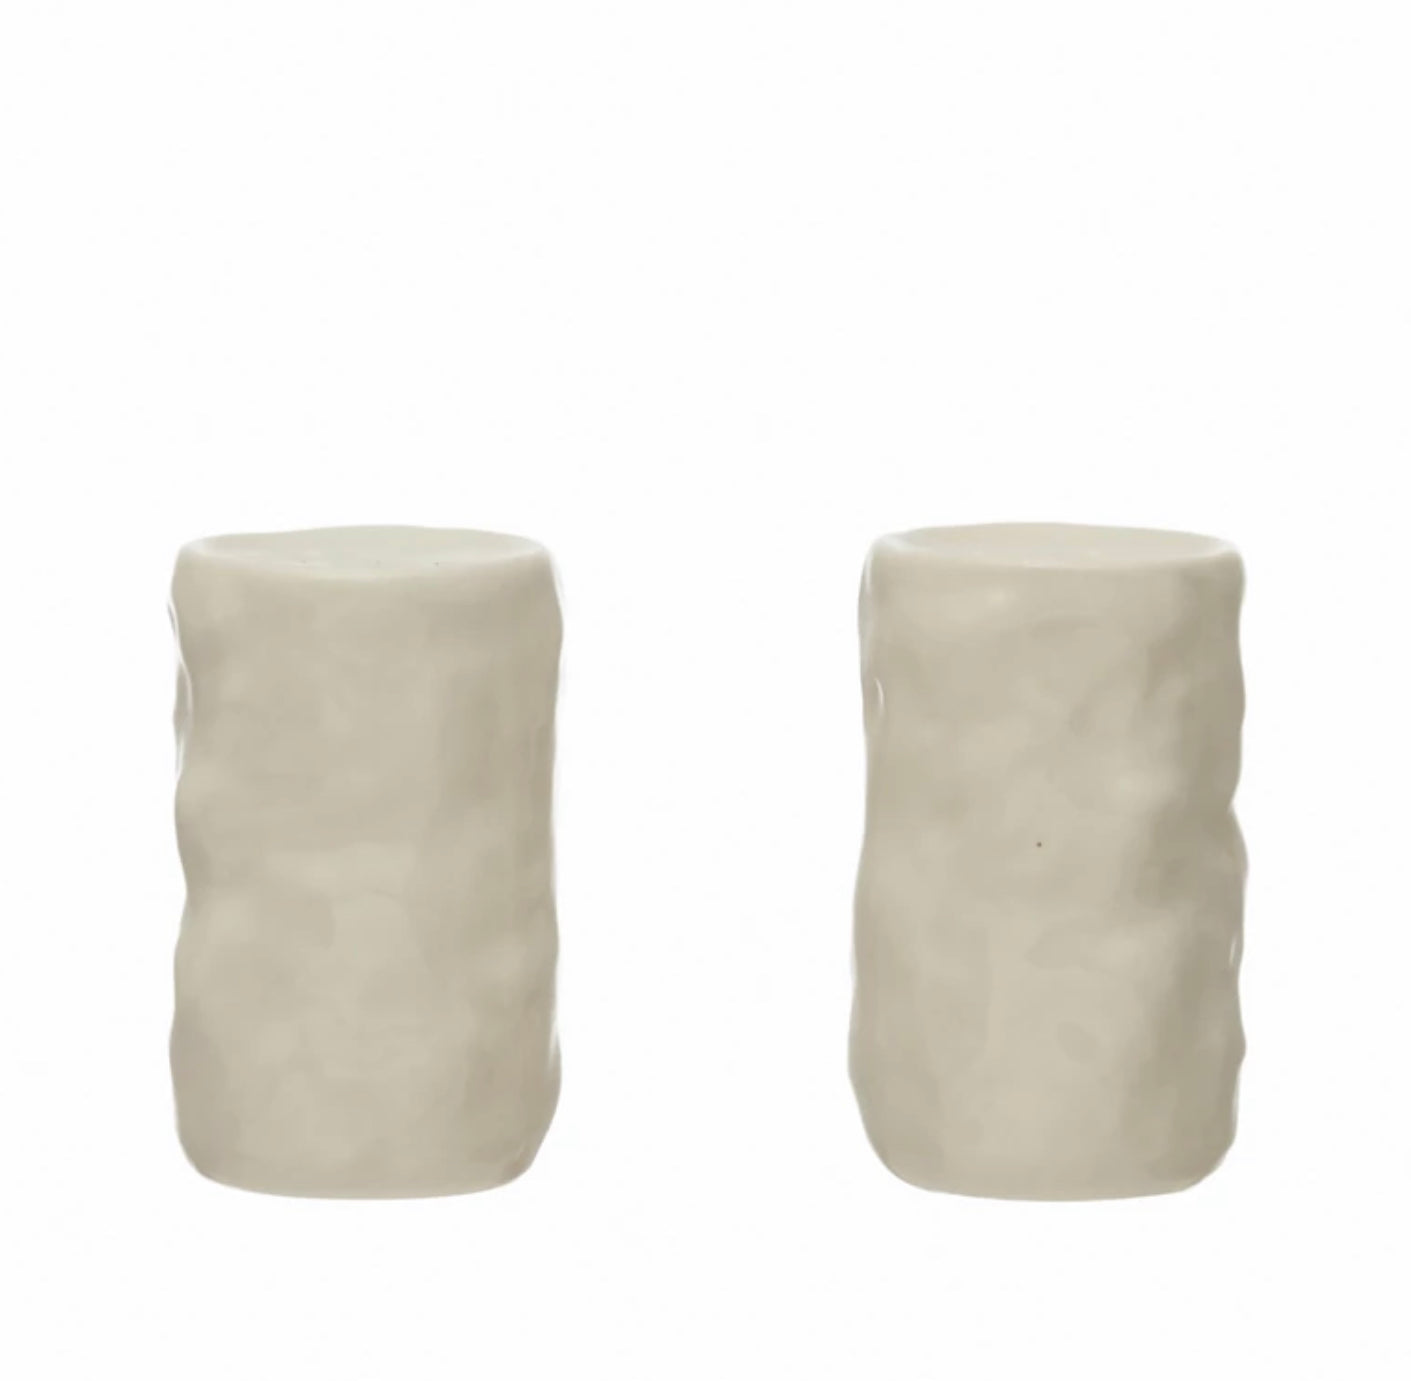 Sculpted Stoneware Salt and Pepper Shakers, Set of 2